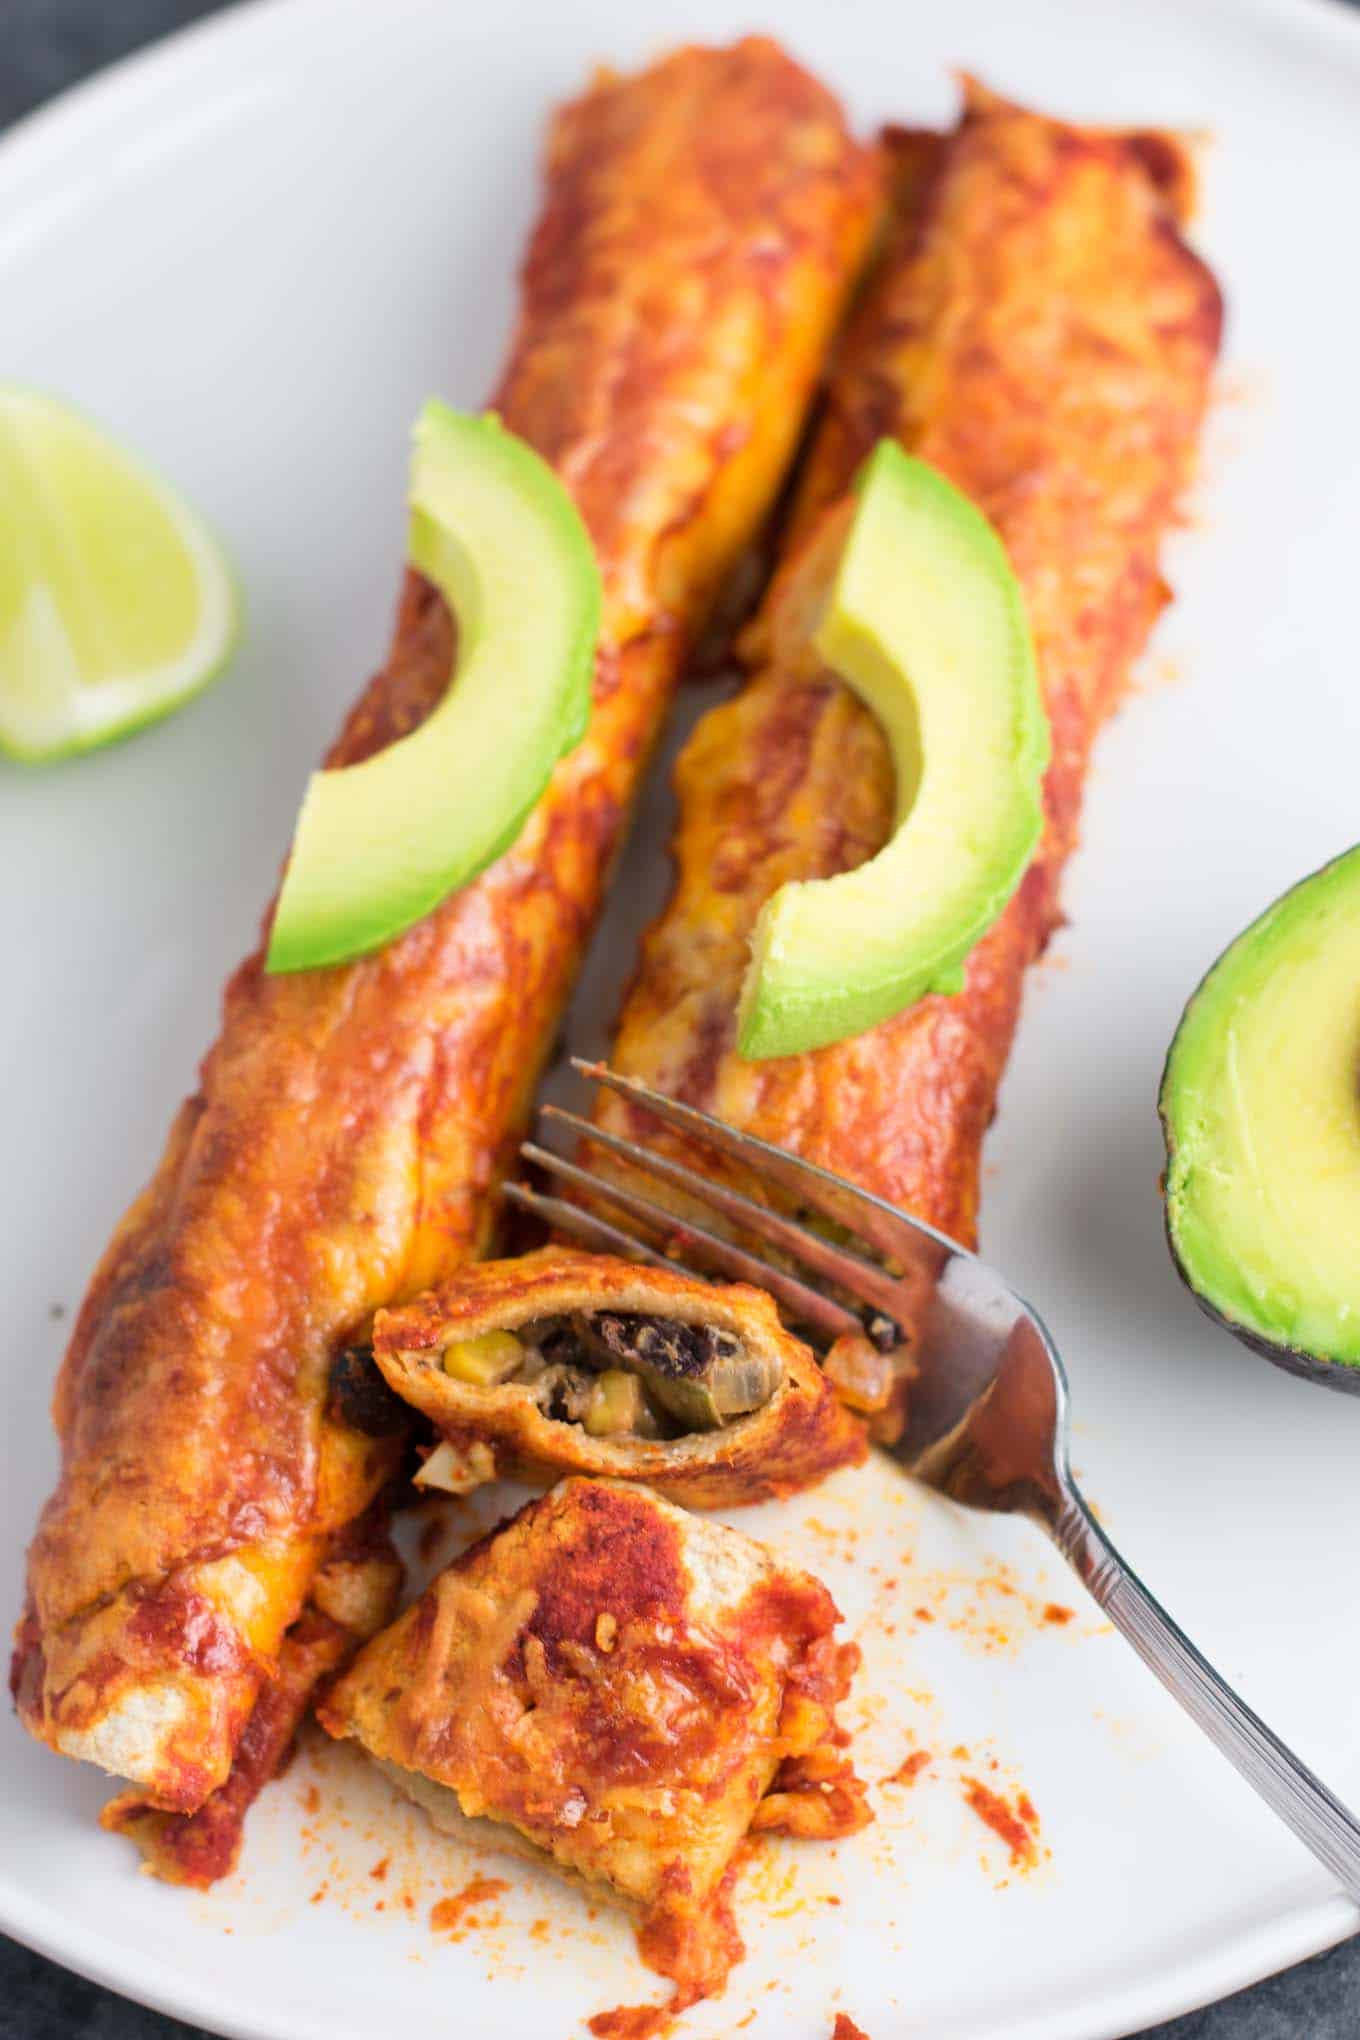 These best ever veggie enchiladas are insanely good! Even meat eaters can’t resist these! #vegetarian #enchiladas #veggieenchiladas #vegetarianenchiladas